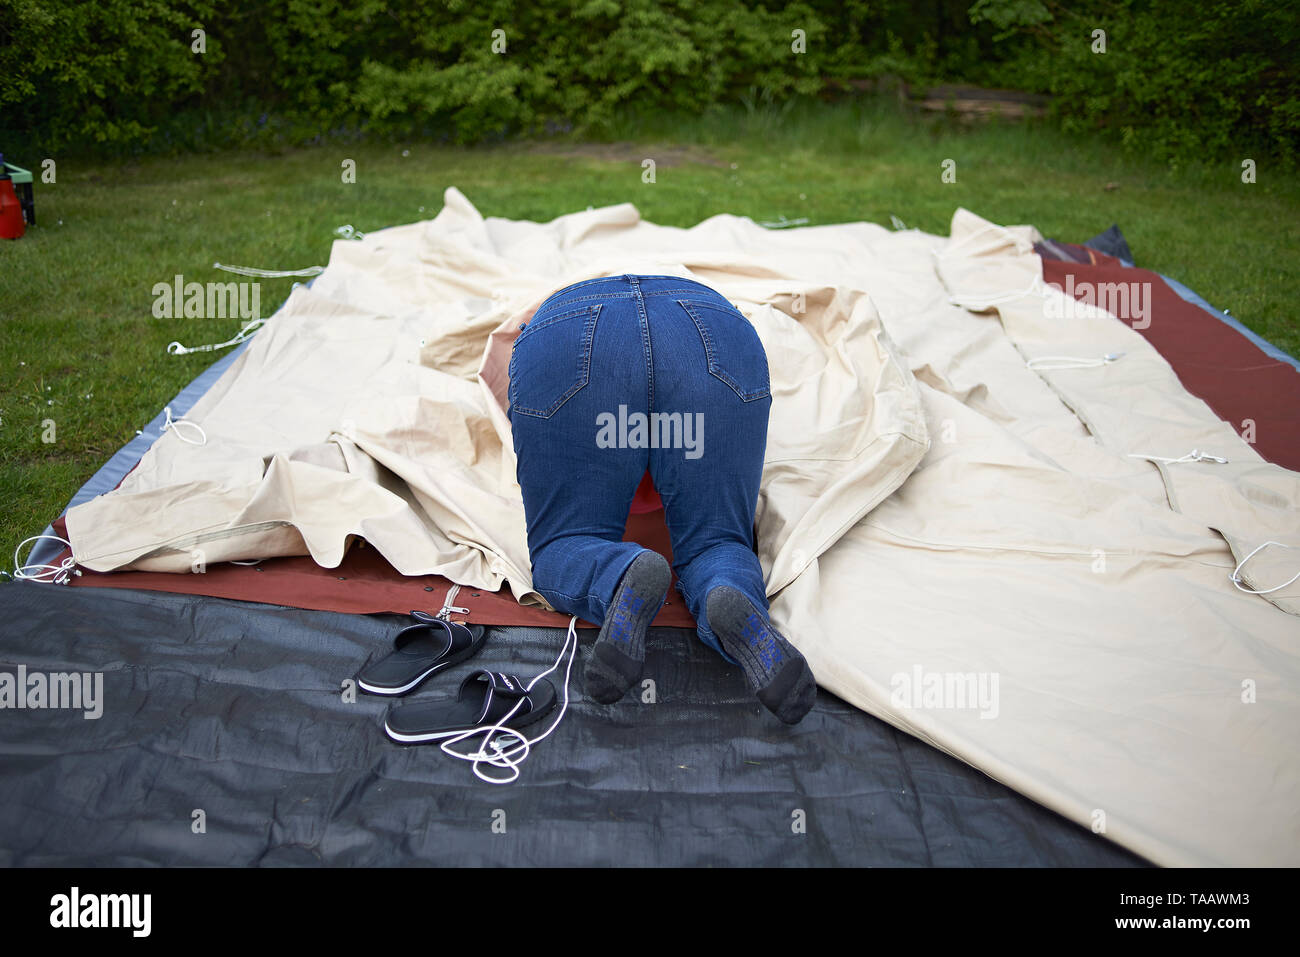 Funny image of a woman with her head inside a tent and her behind sticking out as she attempts to set up the tent outside on a camping ground Stock Photo